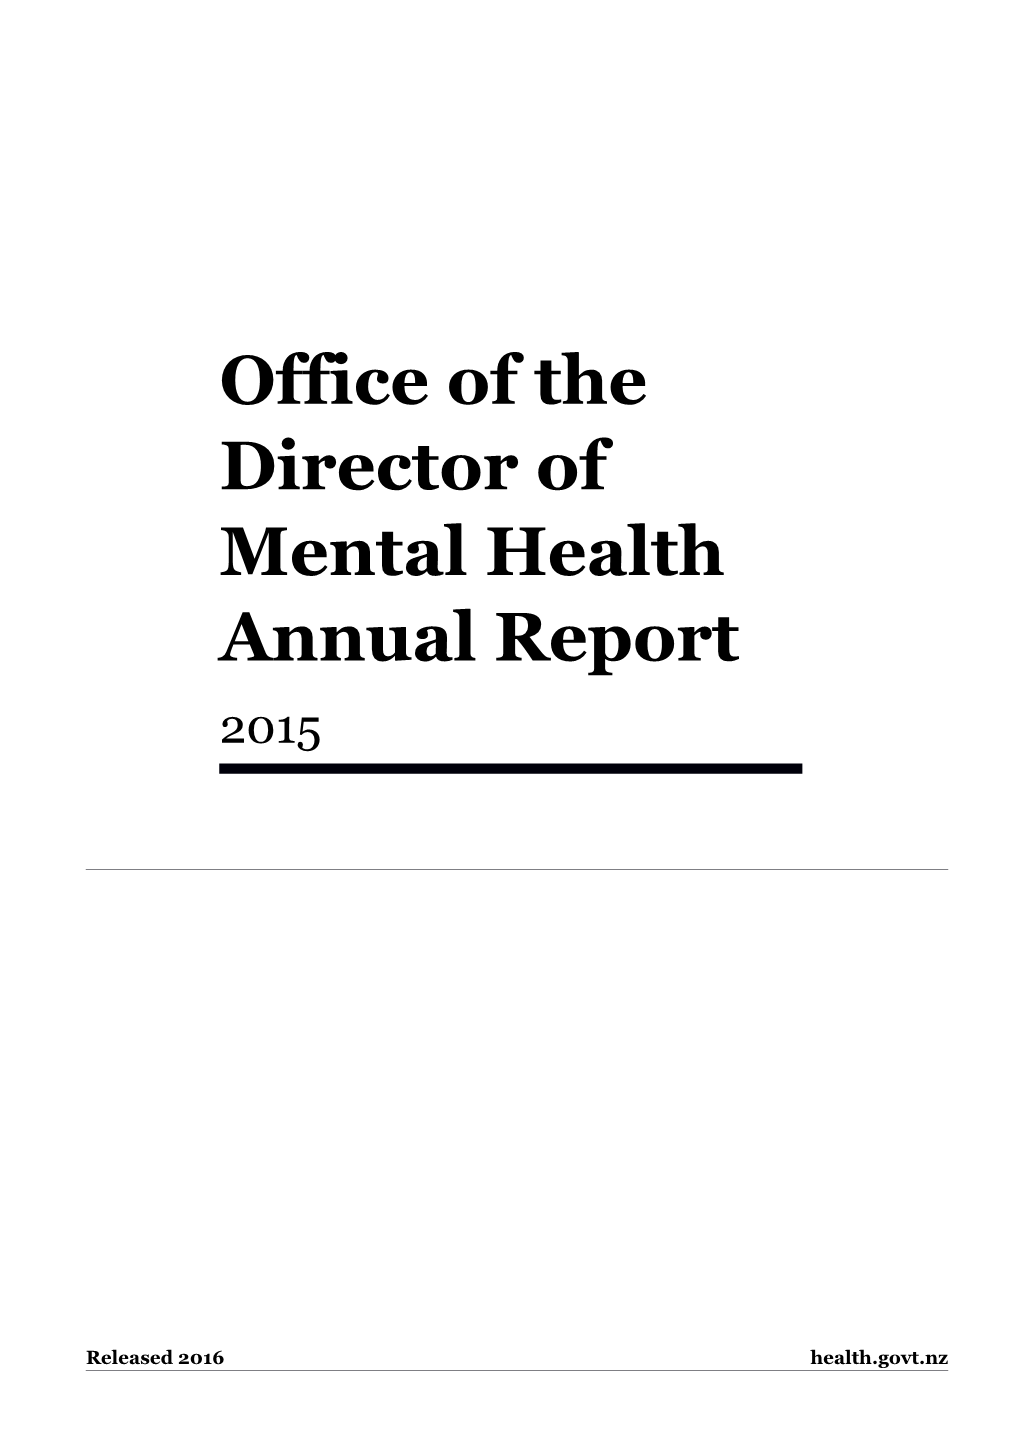 Office of the Director of Mental Health Annual Report 2015